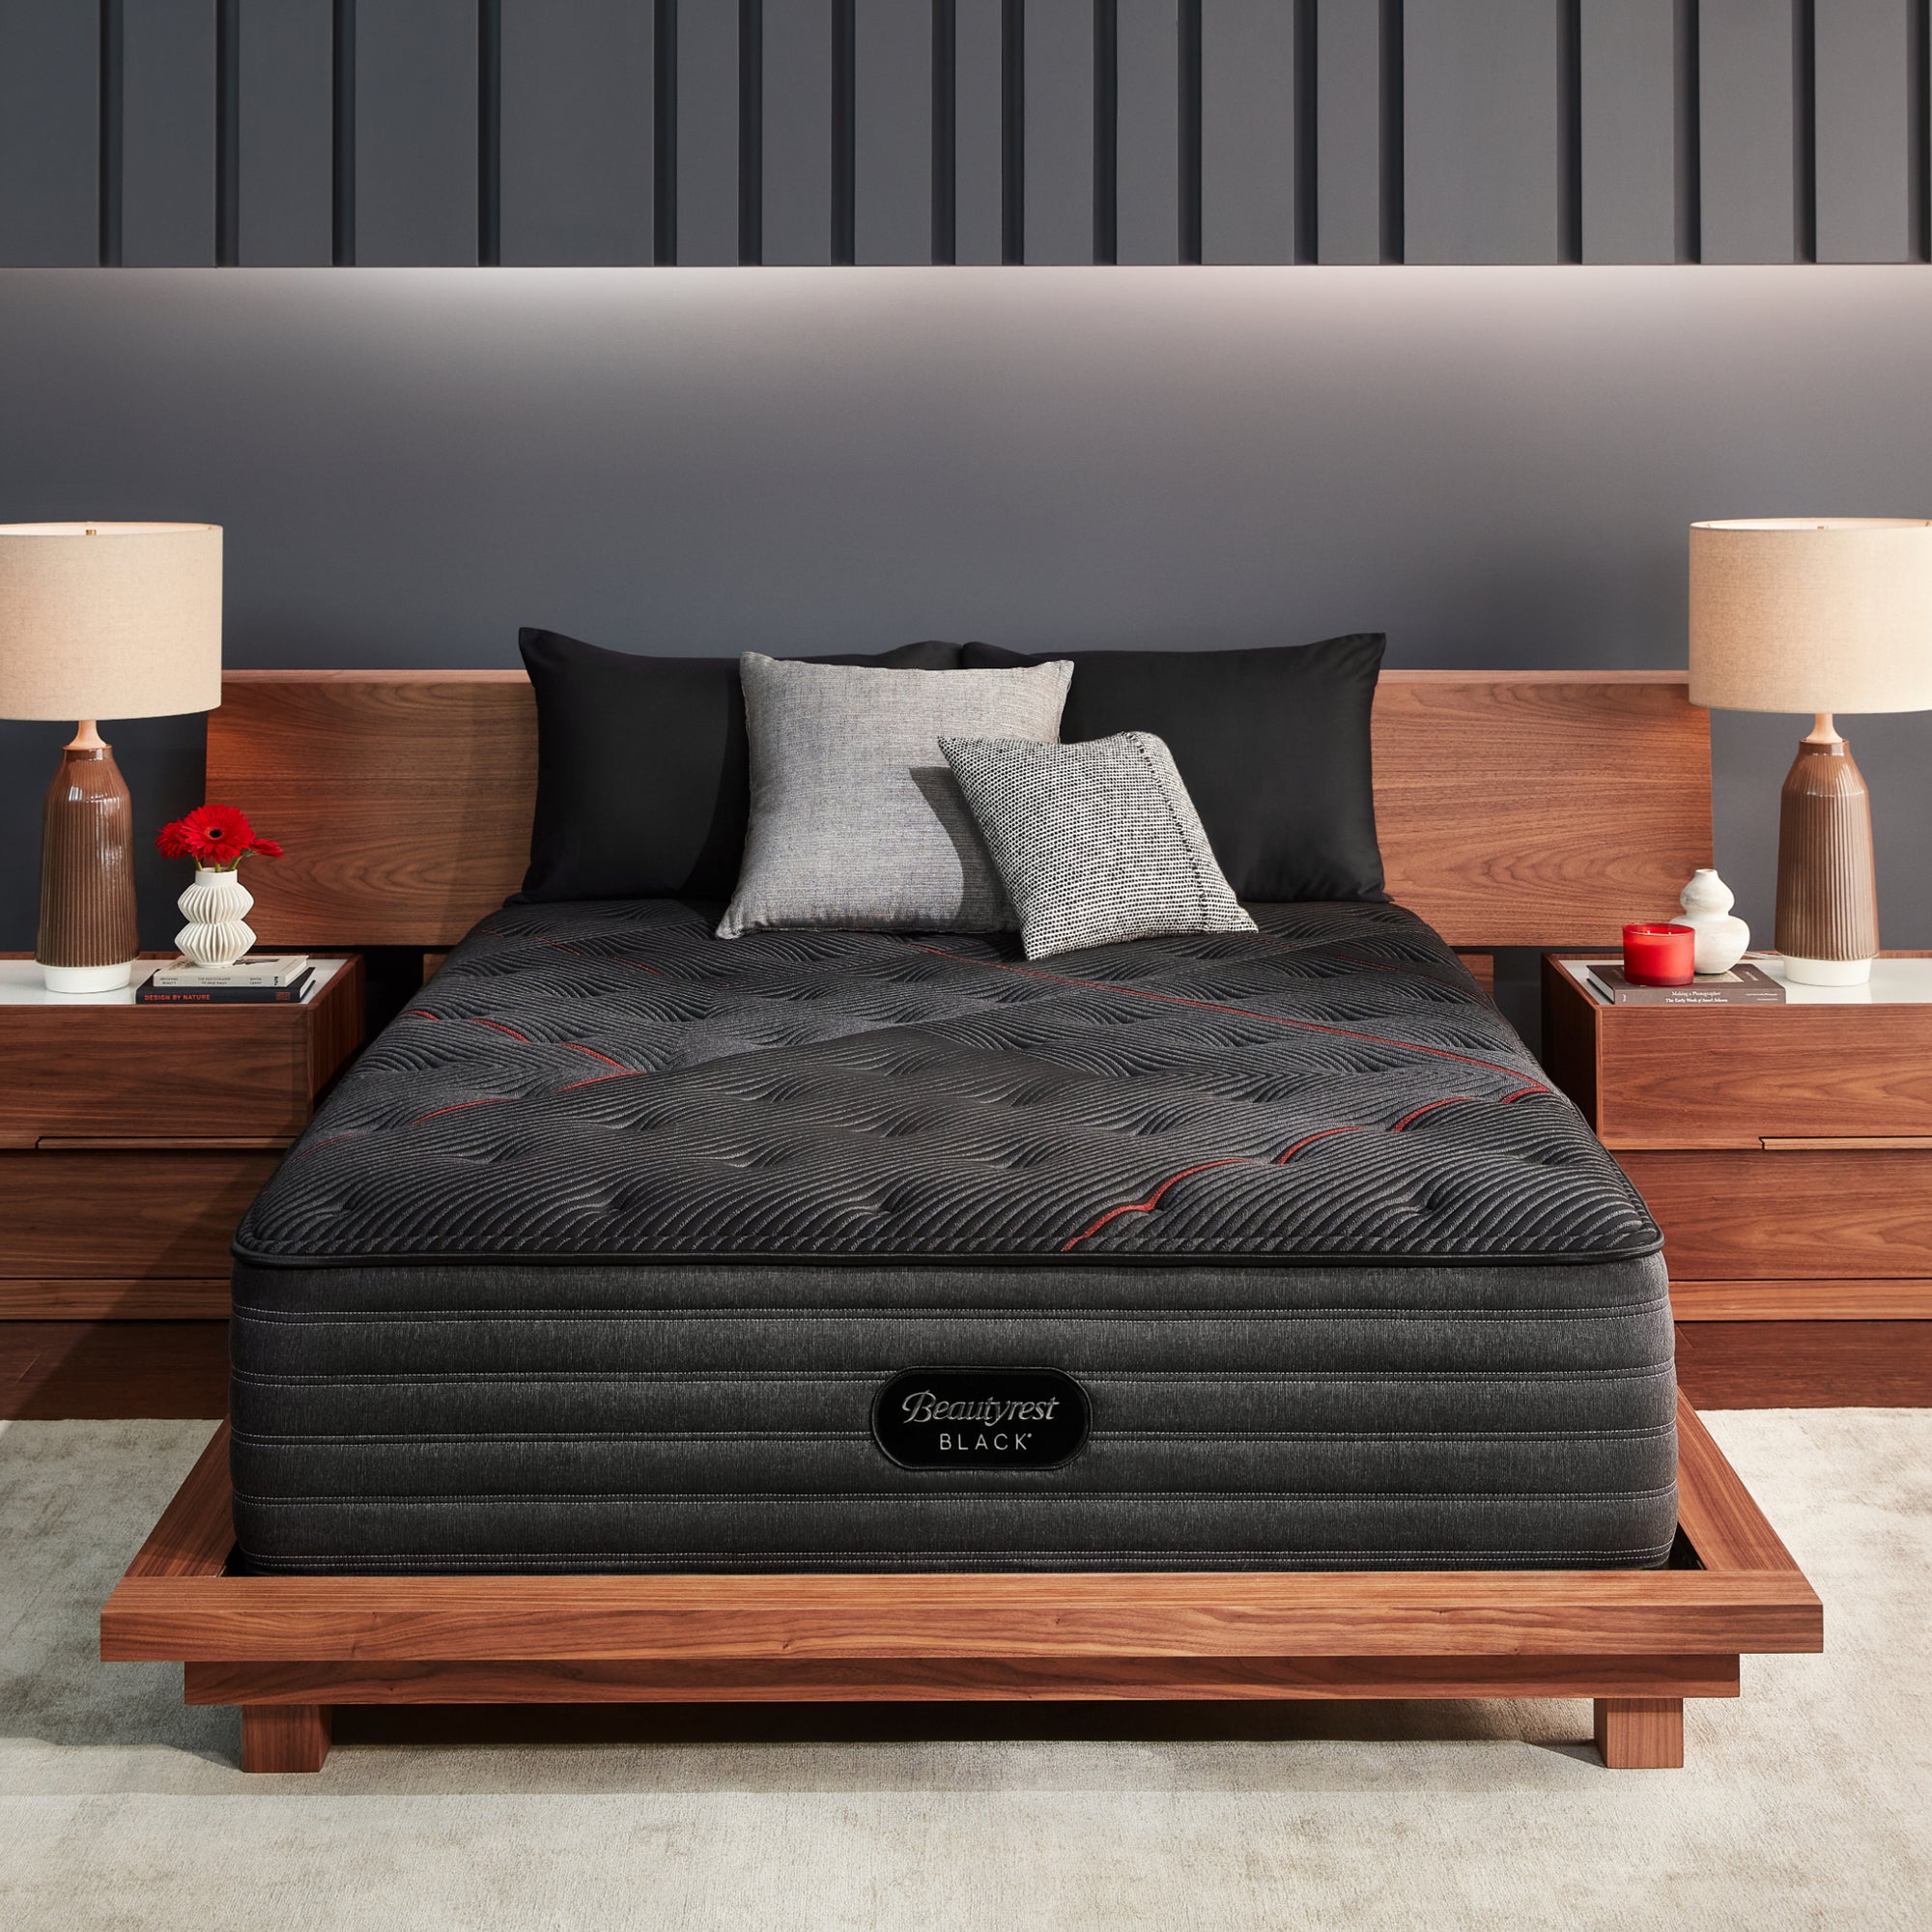 The Beautyrest Black deluxe c-class firm mattress in a bedroom ||series: deluxe c-class|| feel: extra firm